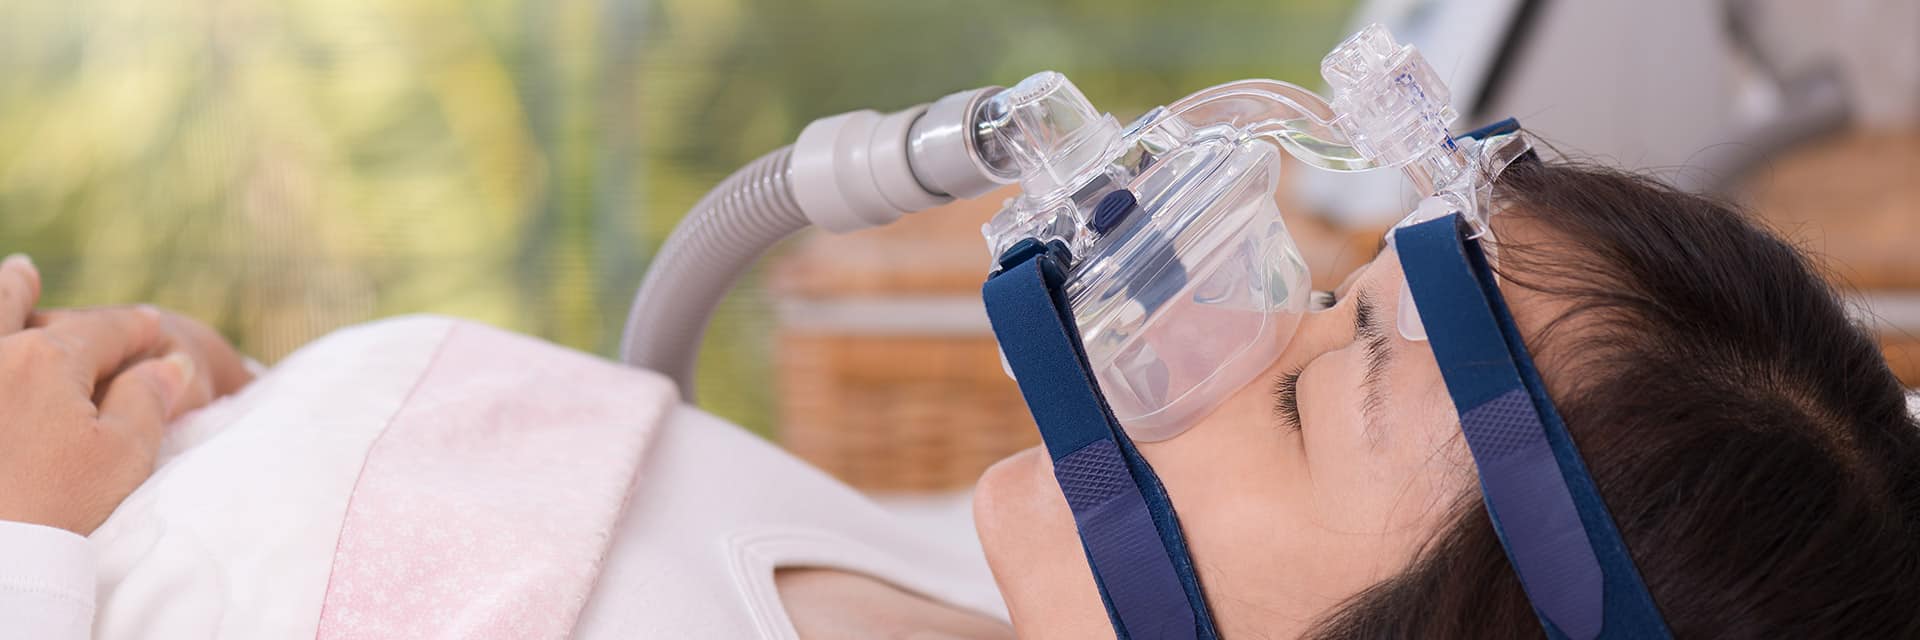 sleep apnea patient sleeping with cpap mask over face